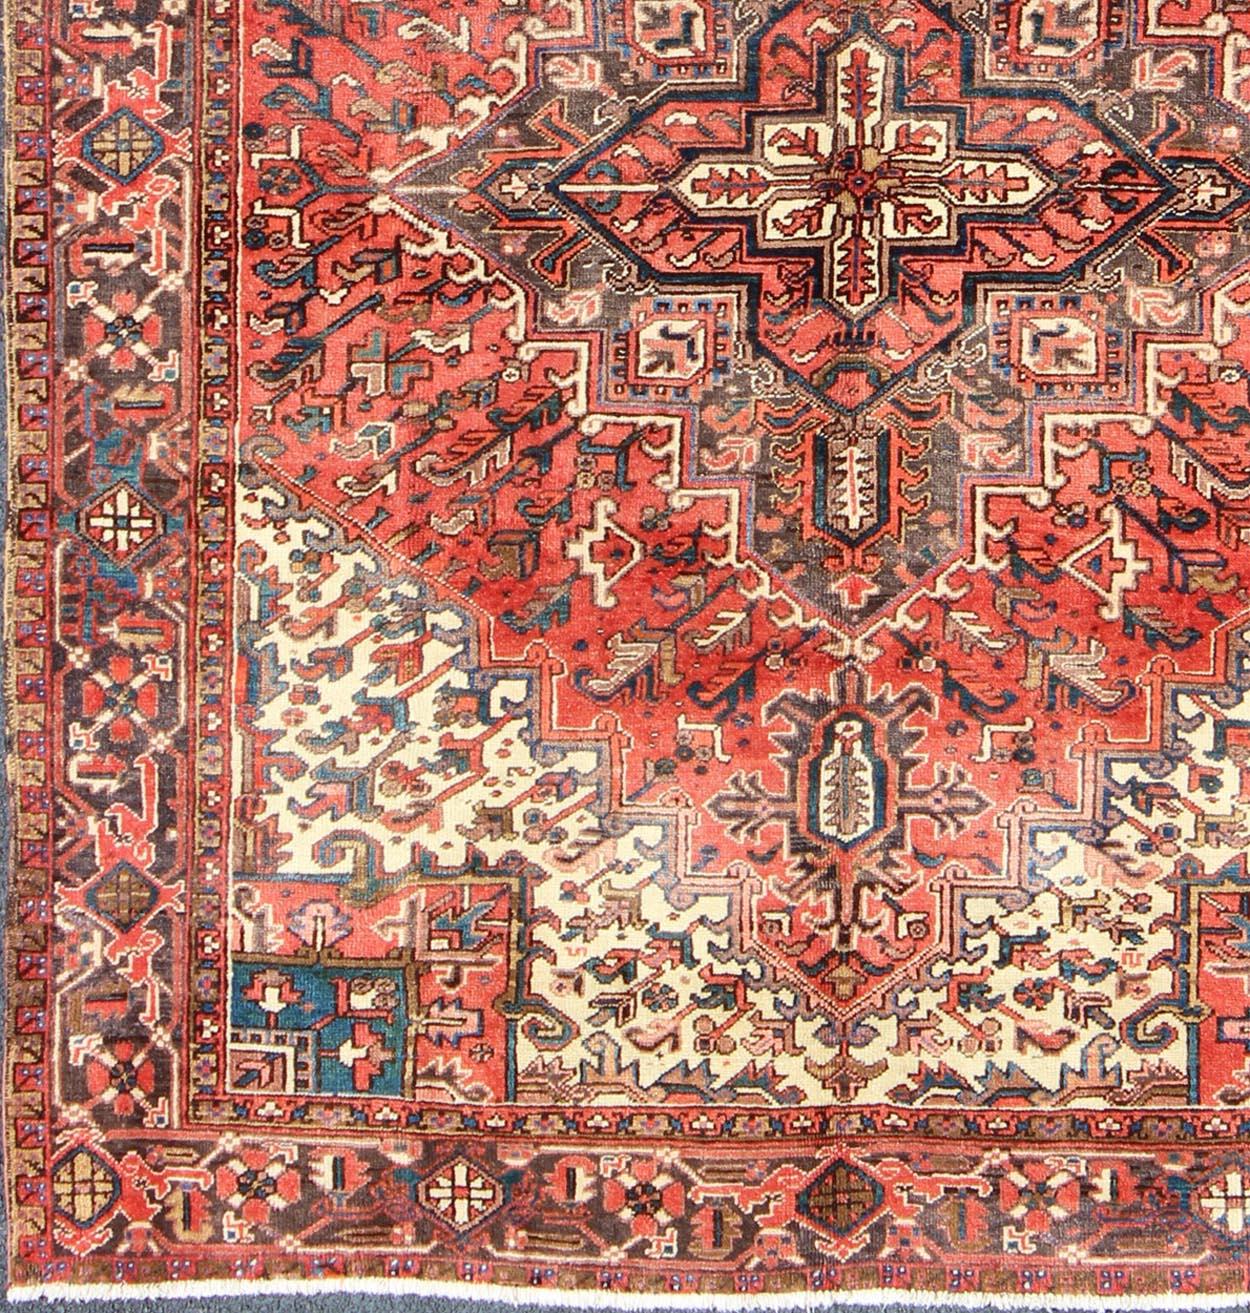 This magnificent antique Persian Heriz from the Mid-20th century bears an exquisite design rendered in gorgeous, warm hues of rust and denim blue. A highly stylized geometric center medallion anchors the rug and is surrounded by numerous geometric